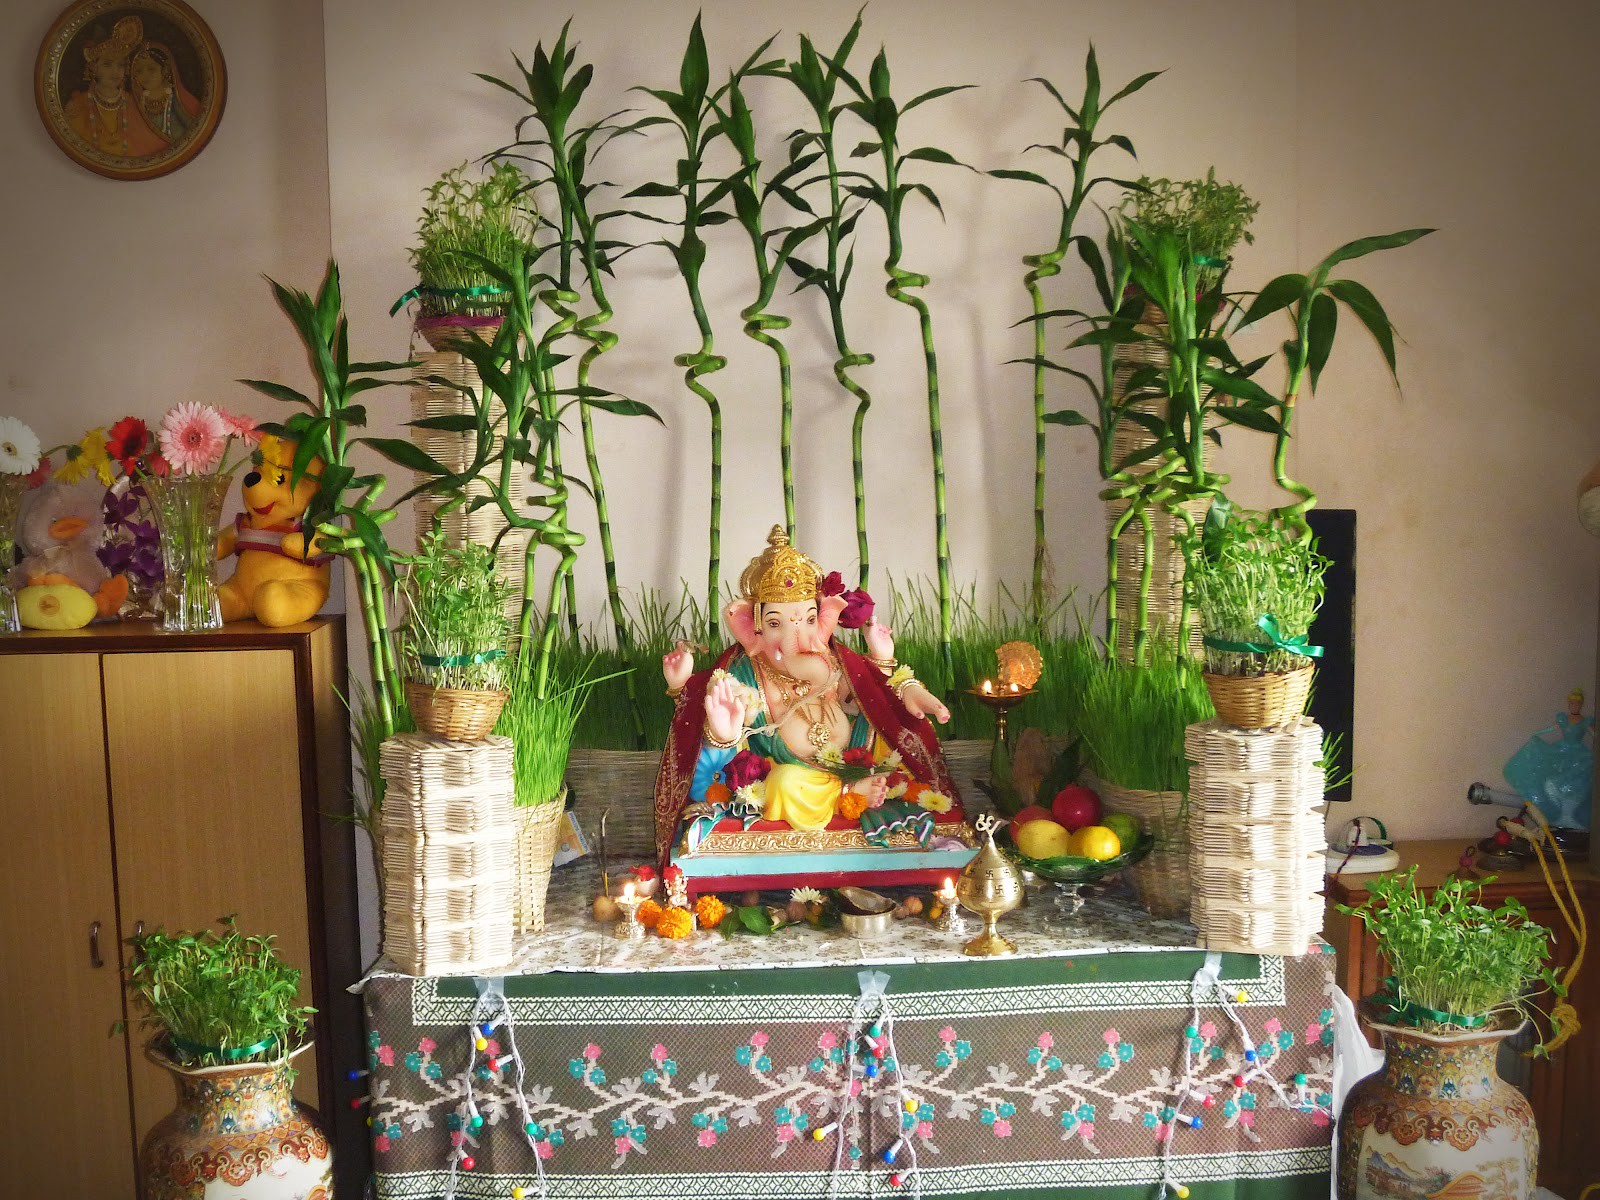 Ganpati decoration ideas at home with flowers & Plants | by Blooms ...